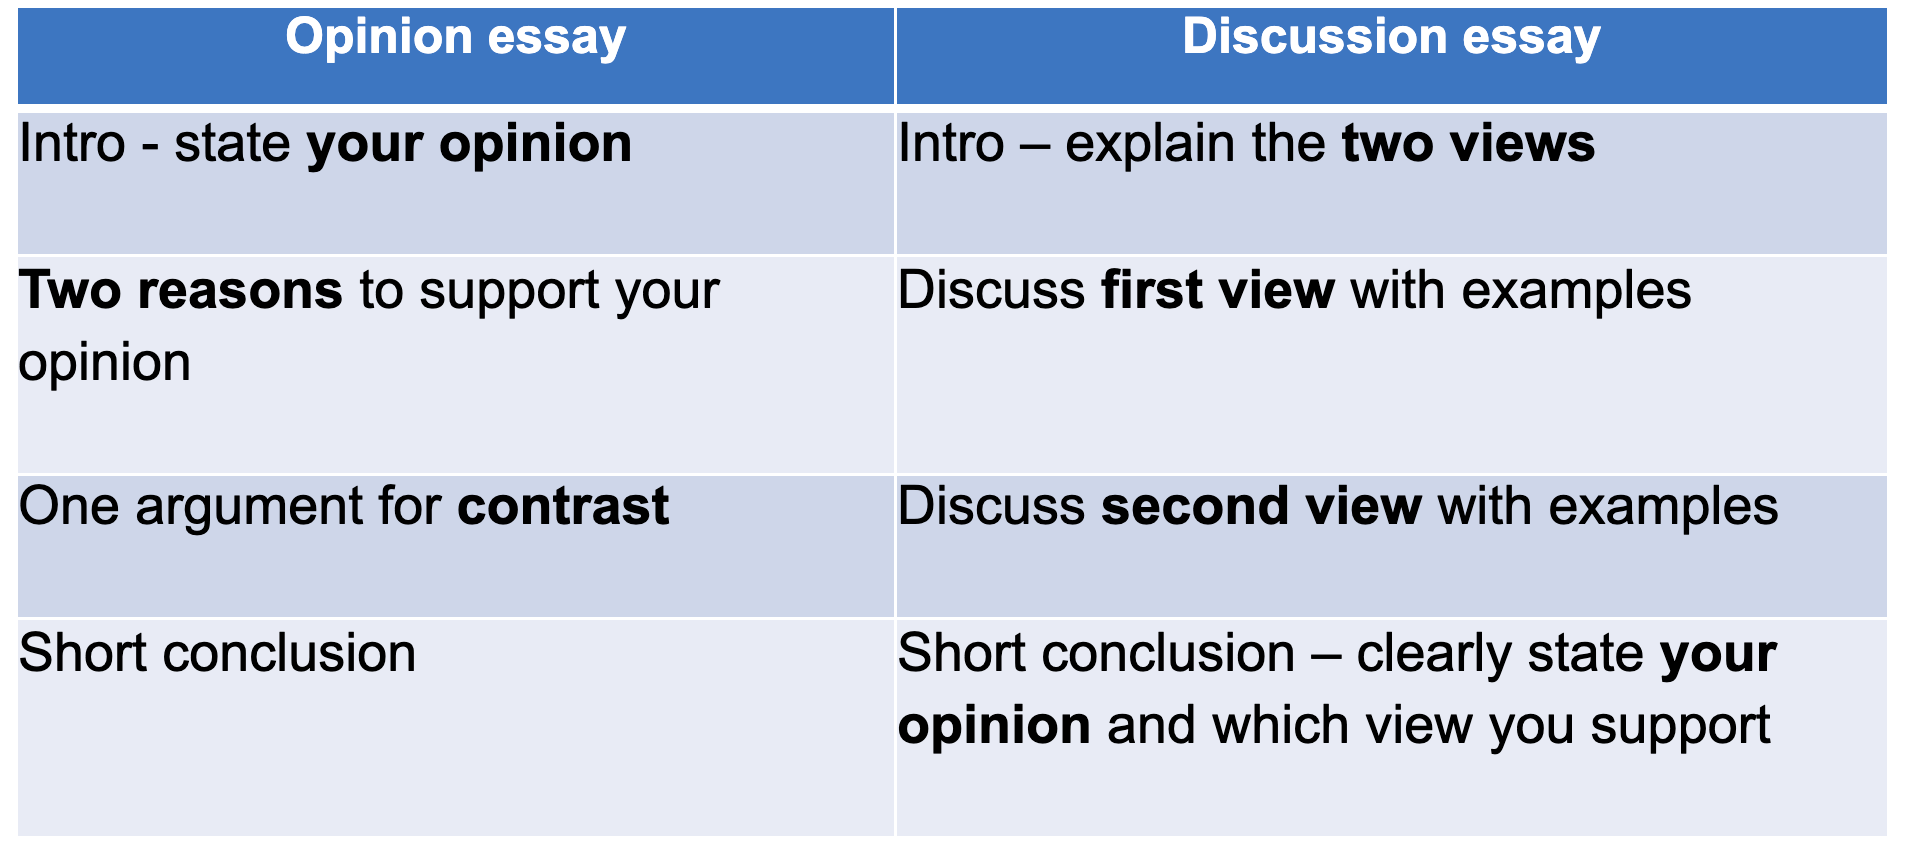 How to Write a Discussion Essay in IELTS